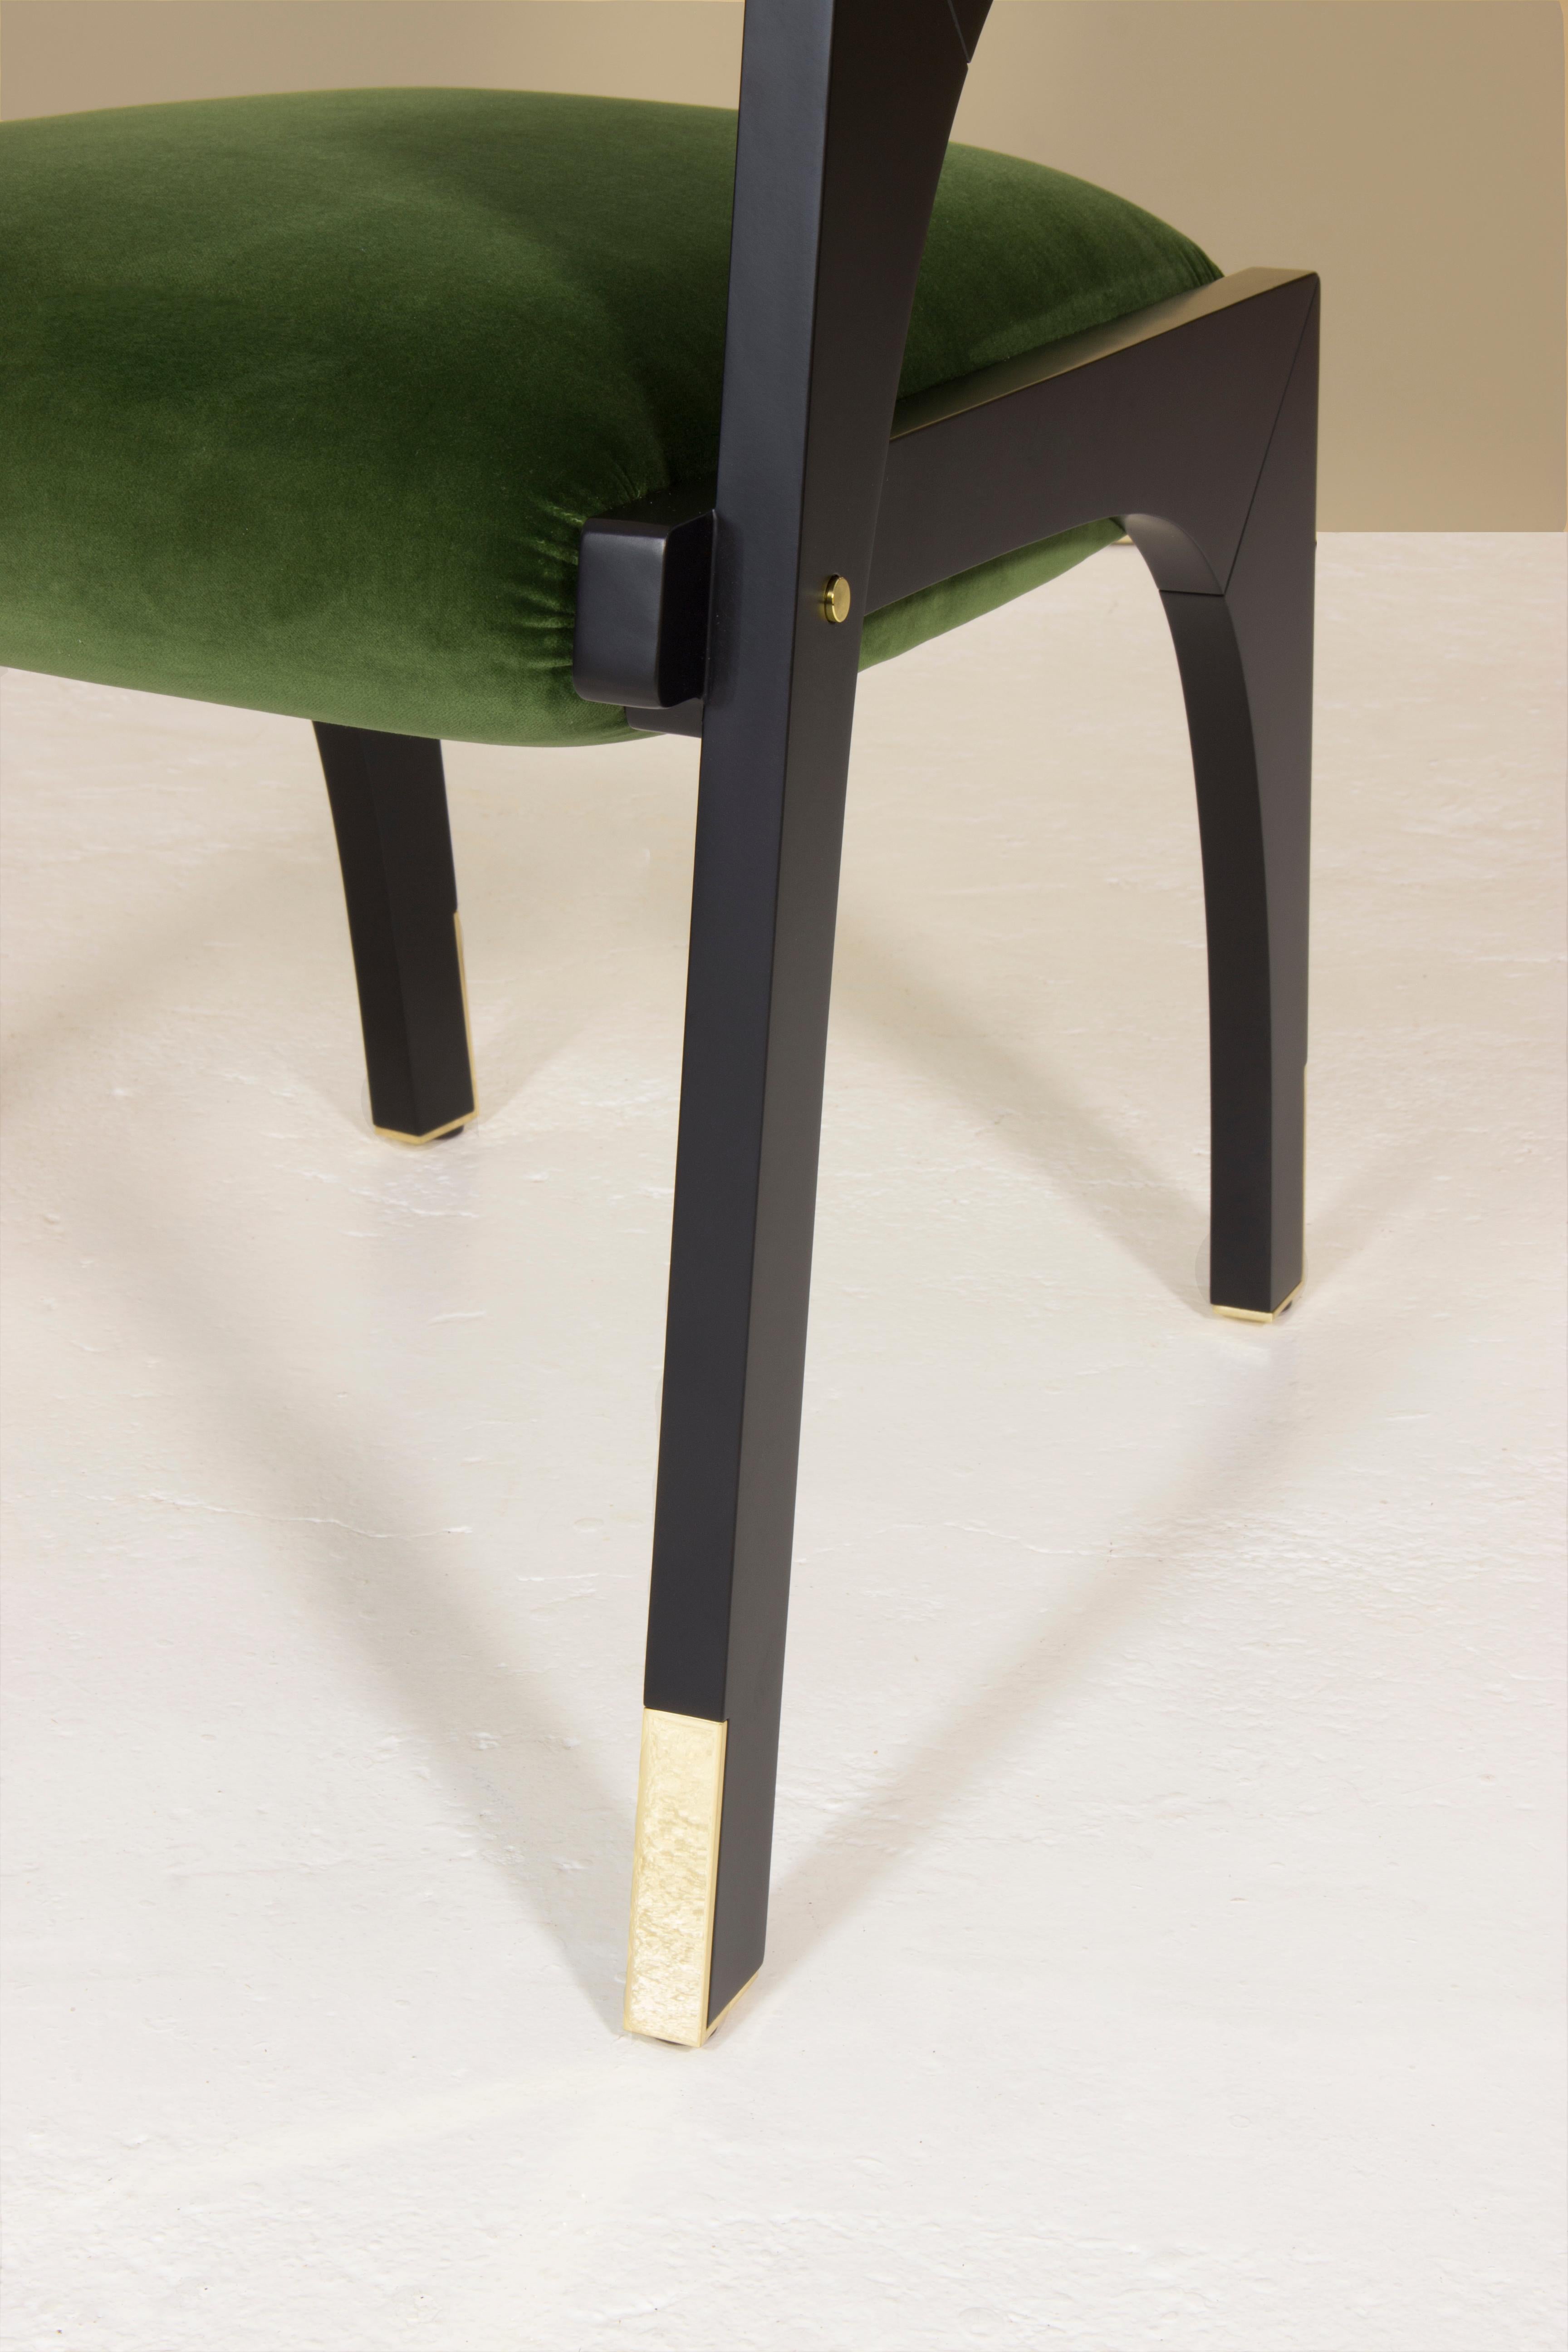 Wood Arches Dining Chair, Velvet & Brass, InsidherLand by Joana Santos Barbosa For Sale